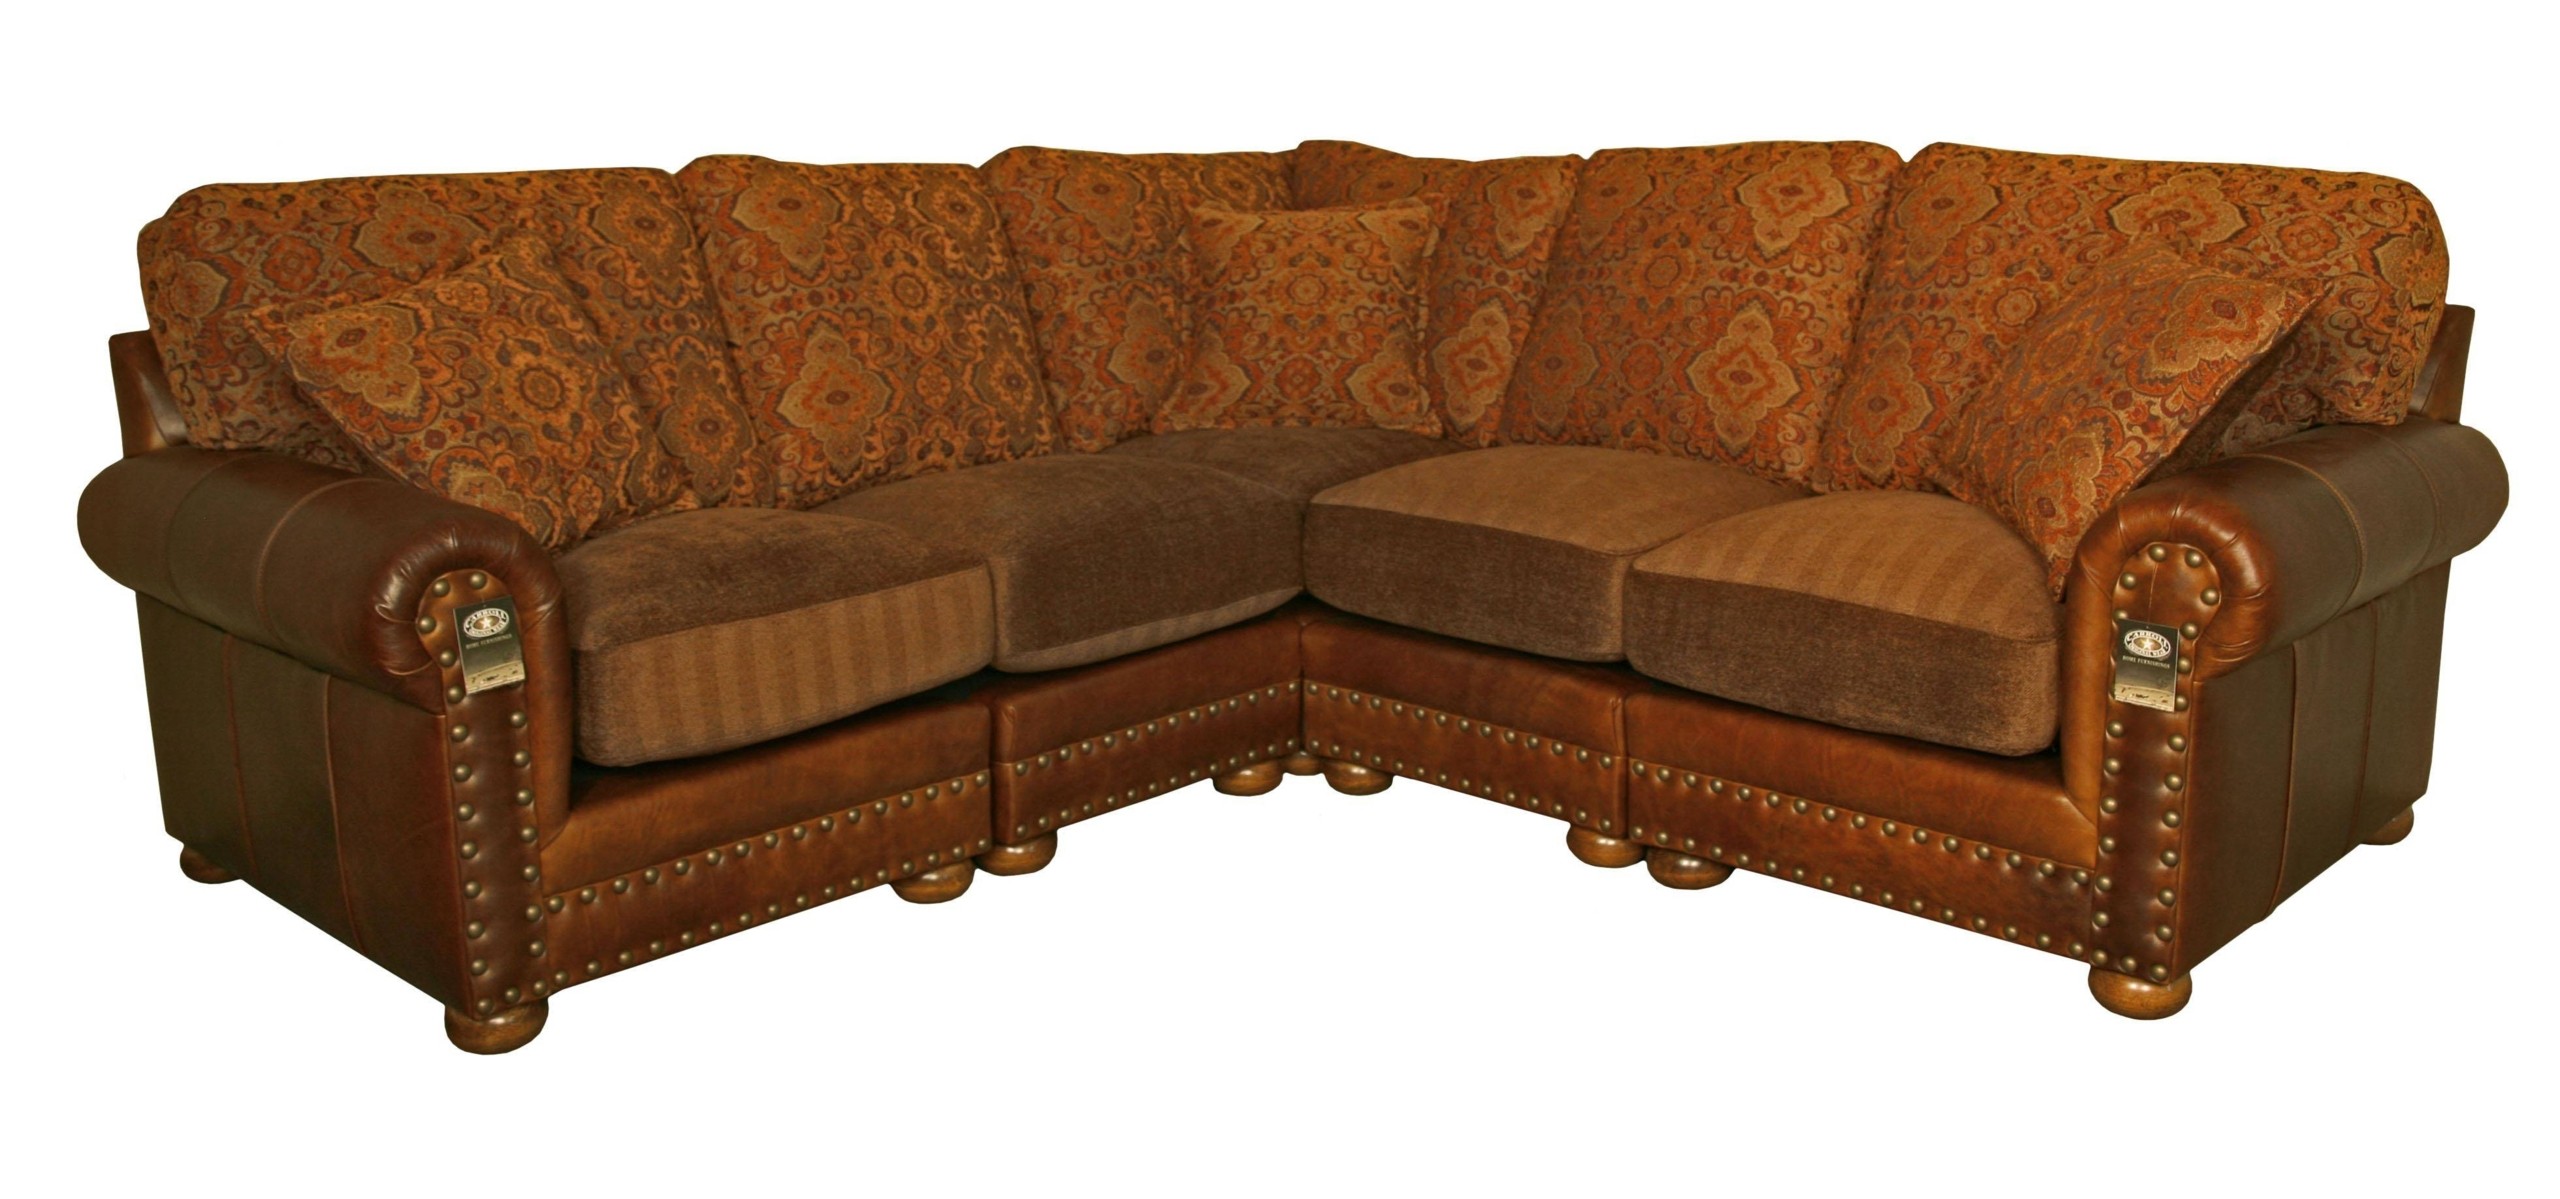 Hinsdale sectional sofa weston pecan leather and fabric combo